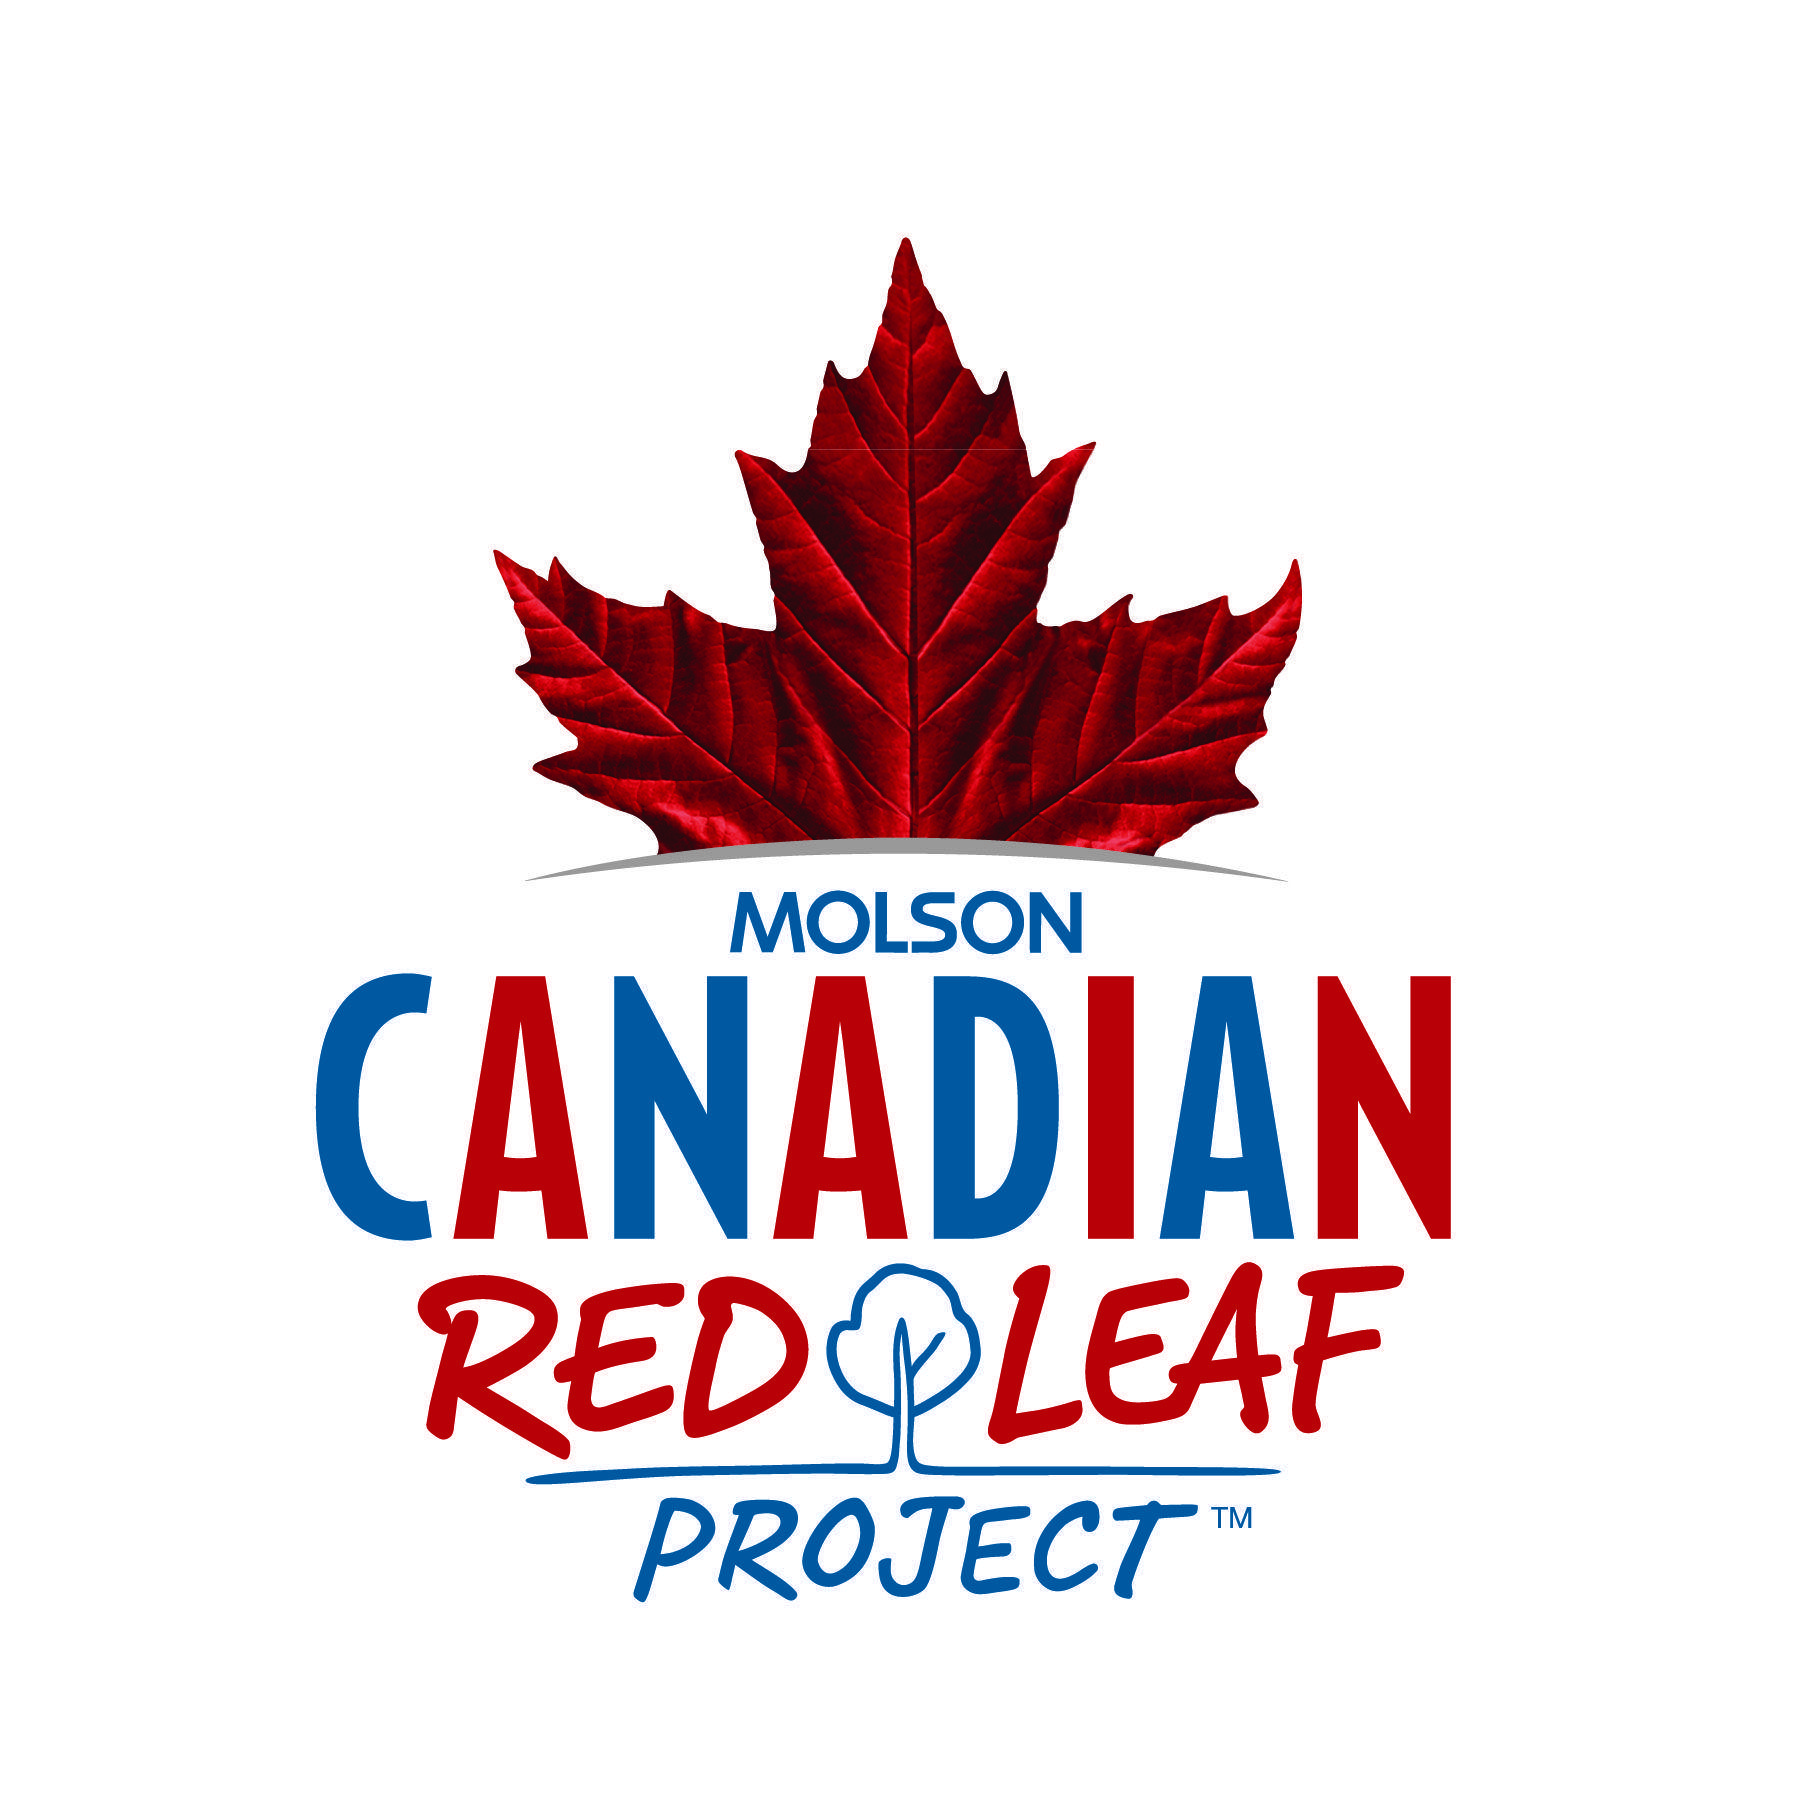 Red Canadian Leaf Logo - The Grass Just Got Greener: Molson Canadian Red Leaf Project Deepens ...